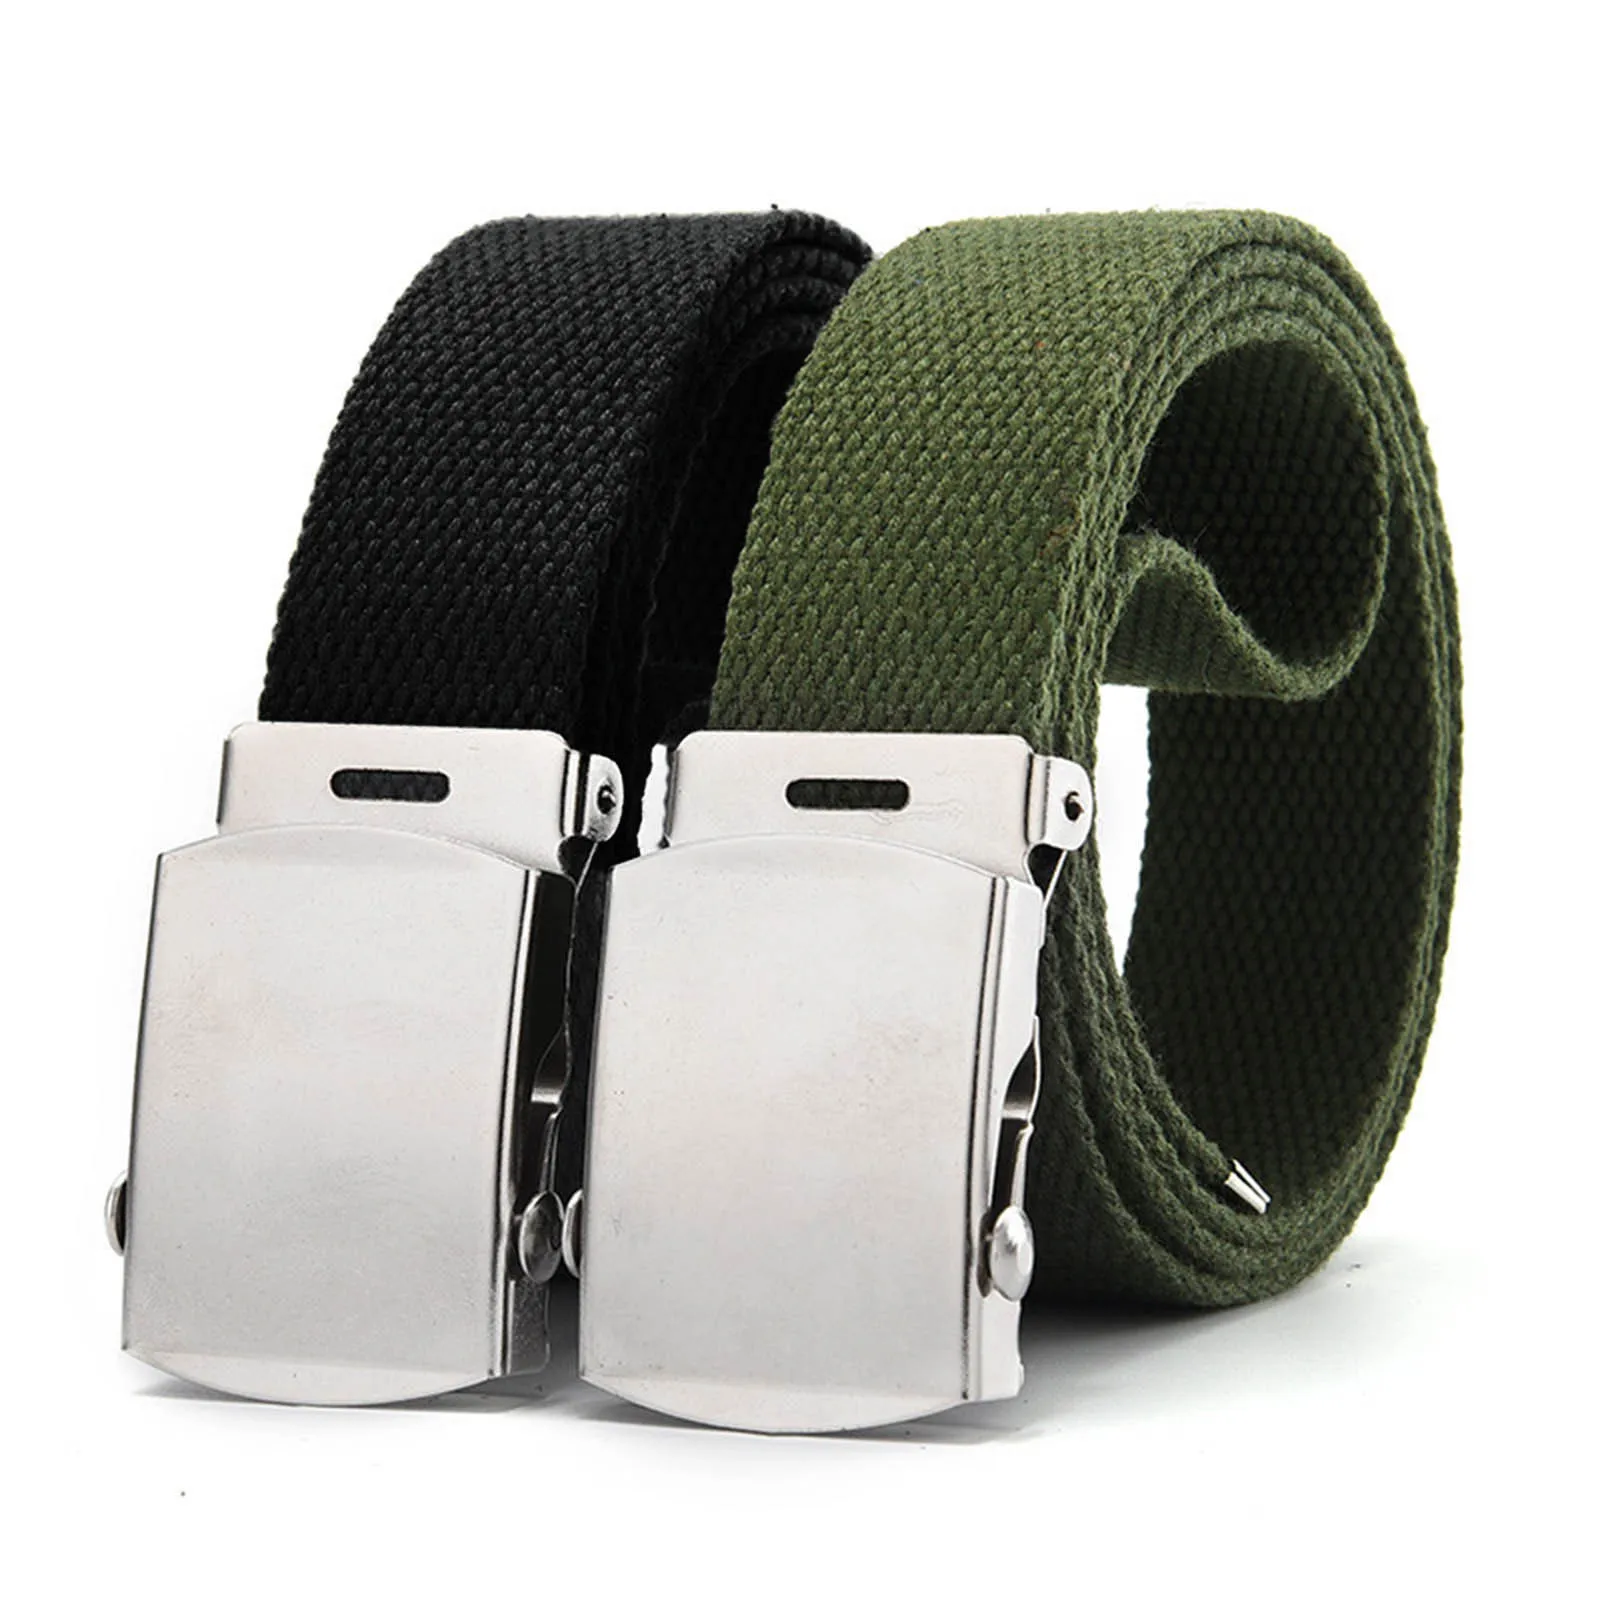 Men's Military Automatic Buckle Nylon Belt Outdoor Hunting Multifunction Canvas Tactical Belt Metal Training Casual Dress Belts